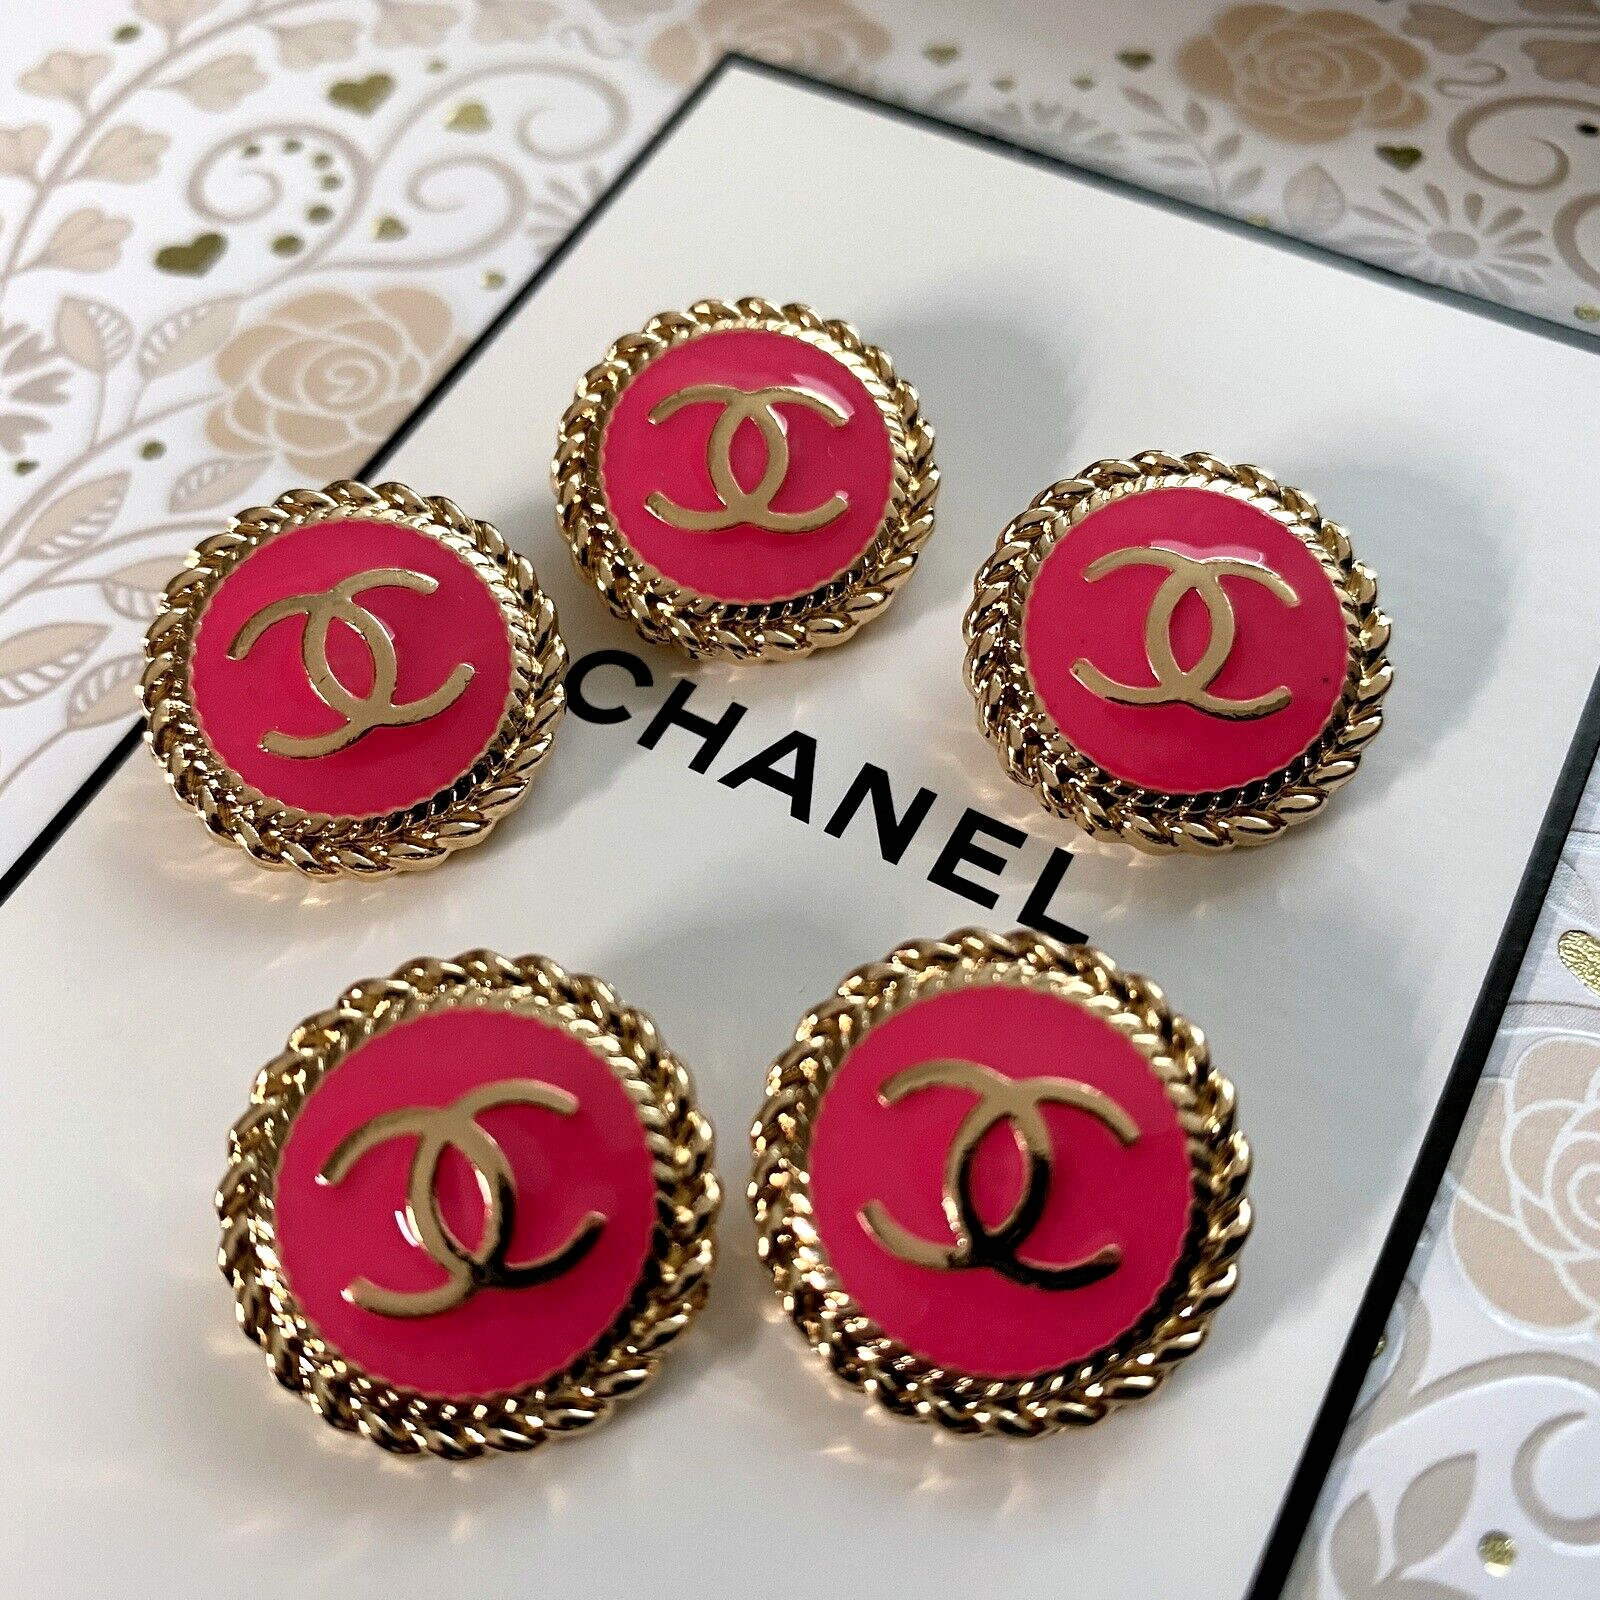 Lot of 8 Chanel Button Gold Tone CC Buttons 20 mm Stamped Logo 0,79 inch purple